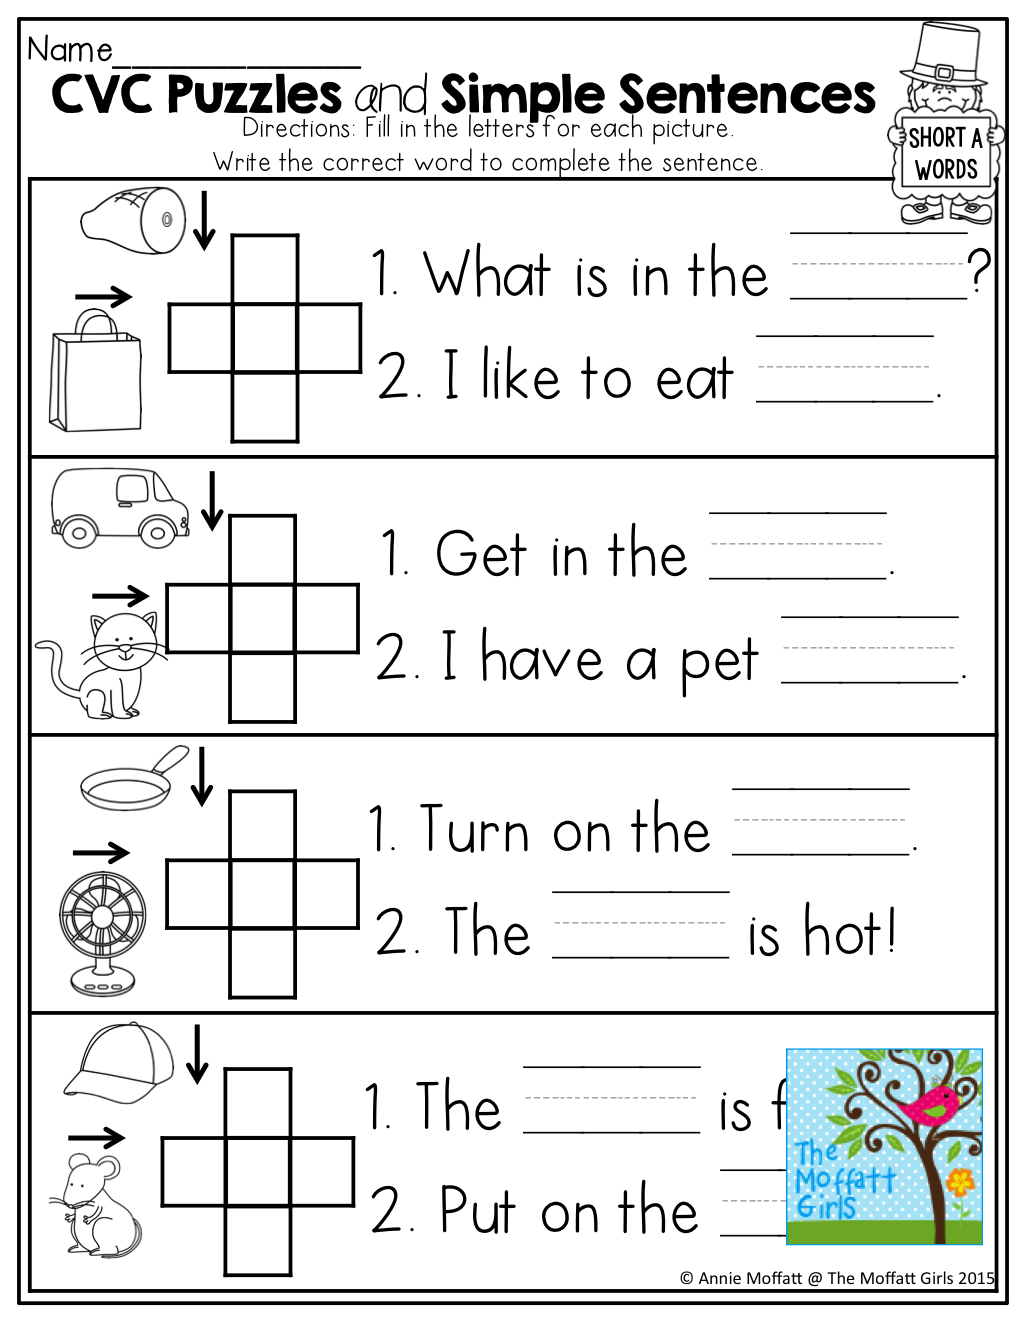 Cvc Crossword Puzzles For Beginning Readers And Simple Sentences